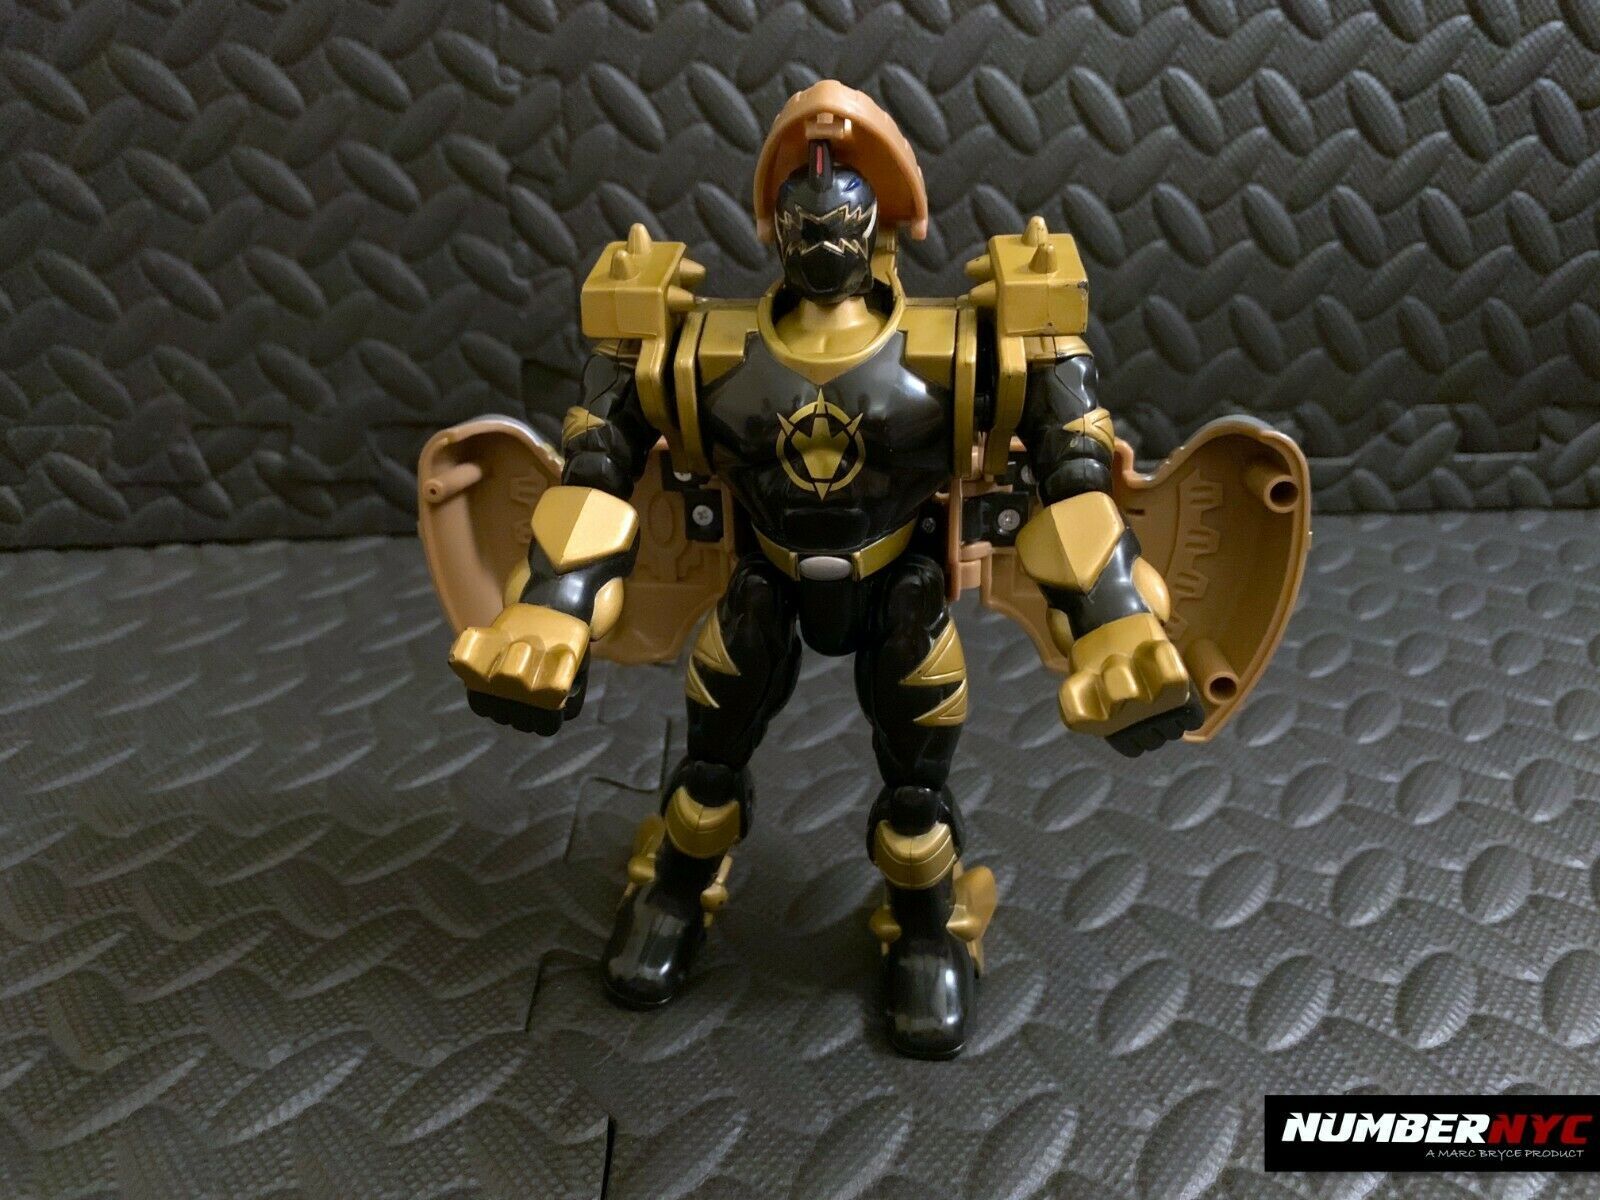 Primary image for 2003 Power Rangers Bandai Black and Gold Transformer head pops up chest opens